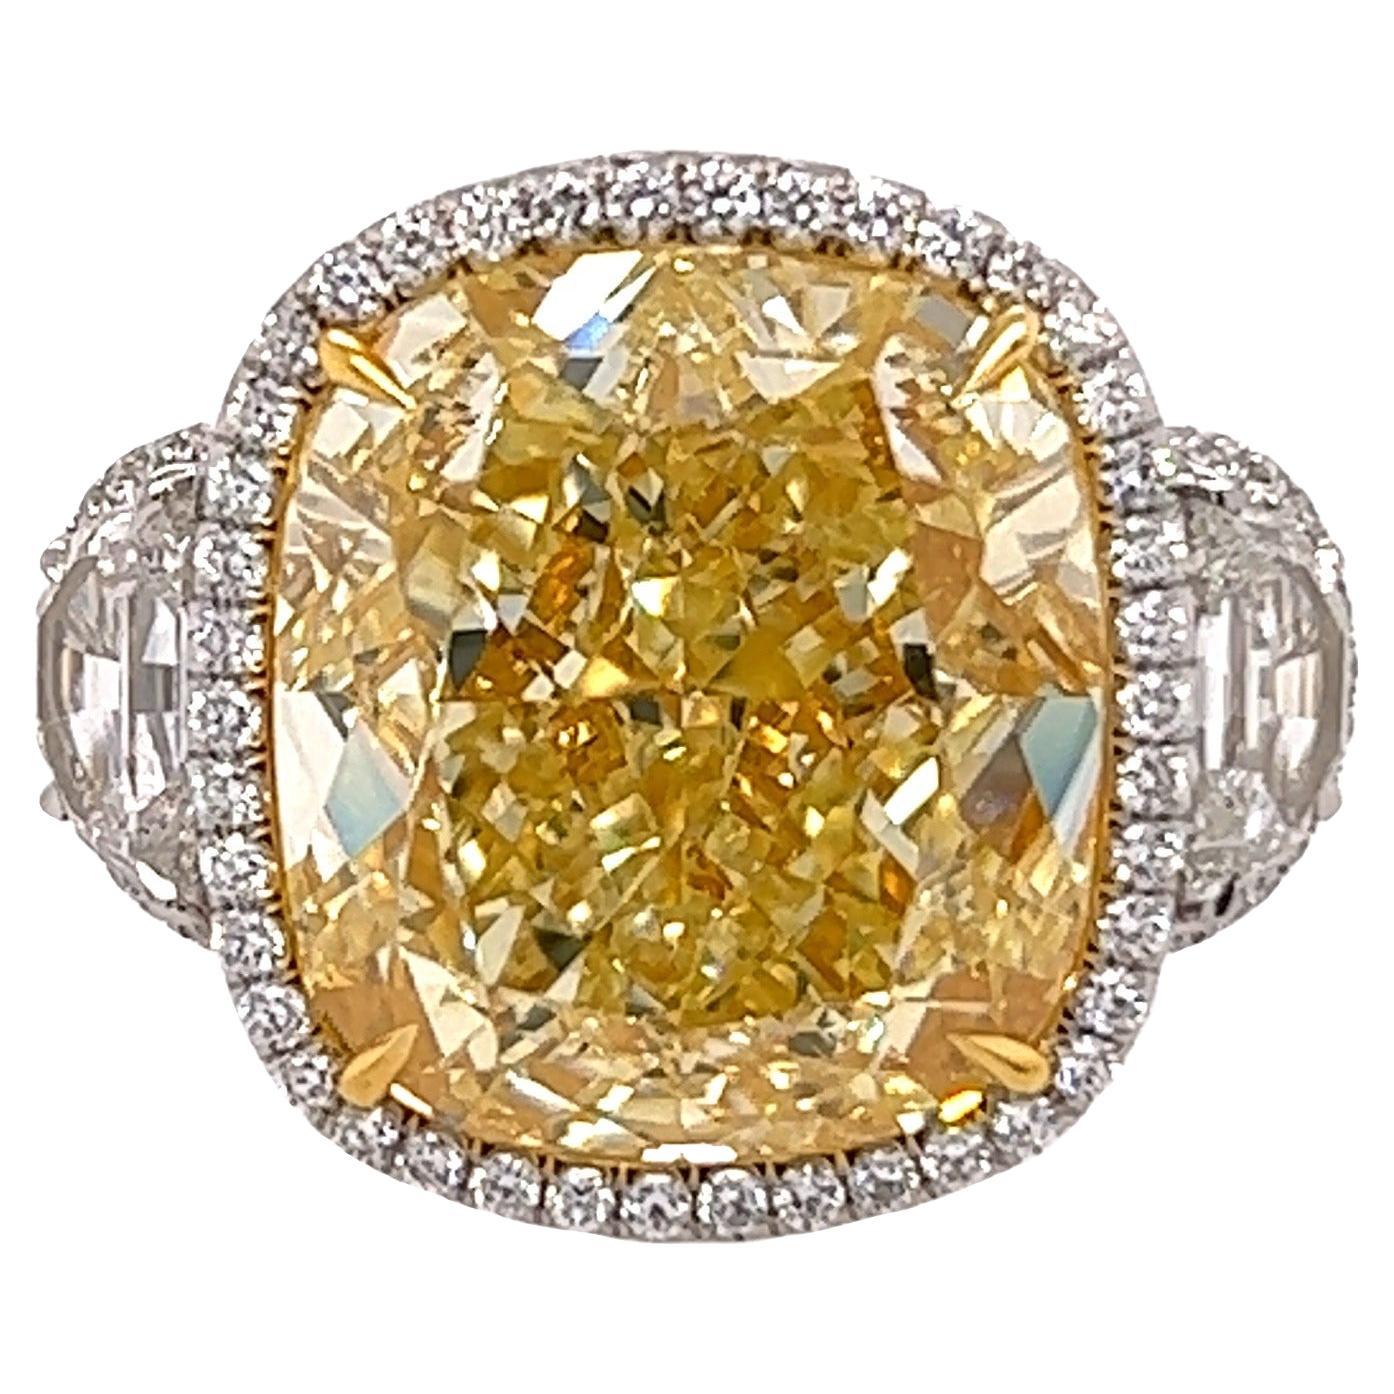 Rosenberg Diamonds & Co. 16.06 carat Cushion Cut Fancy Yellow VS2 clarity is accompanied by a GIA certificate. This spectacular Cushion is full of brilliance and it is set in a handmade platinum & 18 karat yellow gold setting with perfectly matched